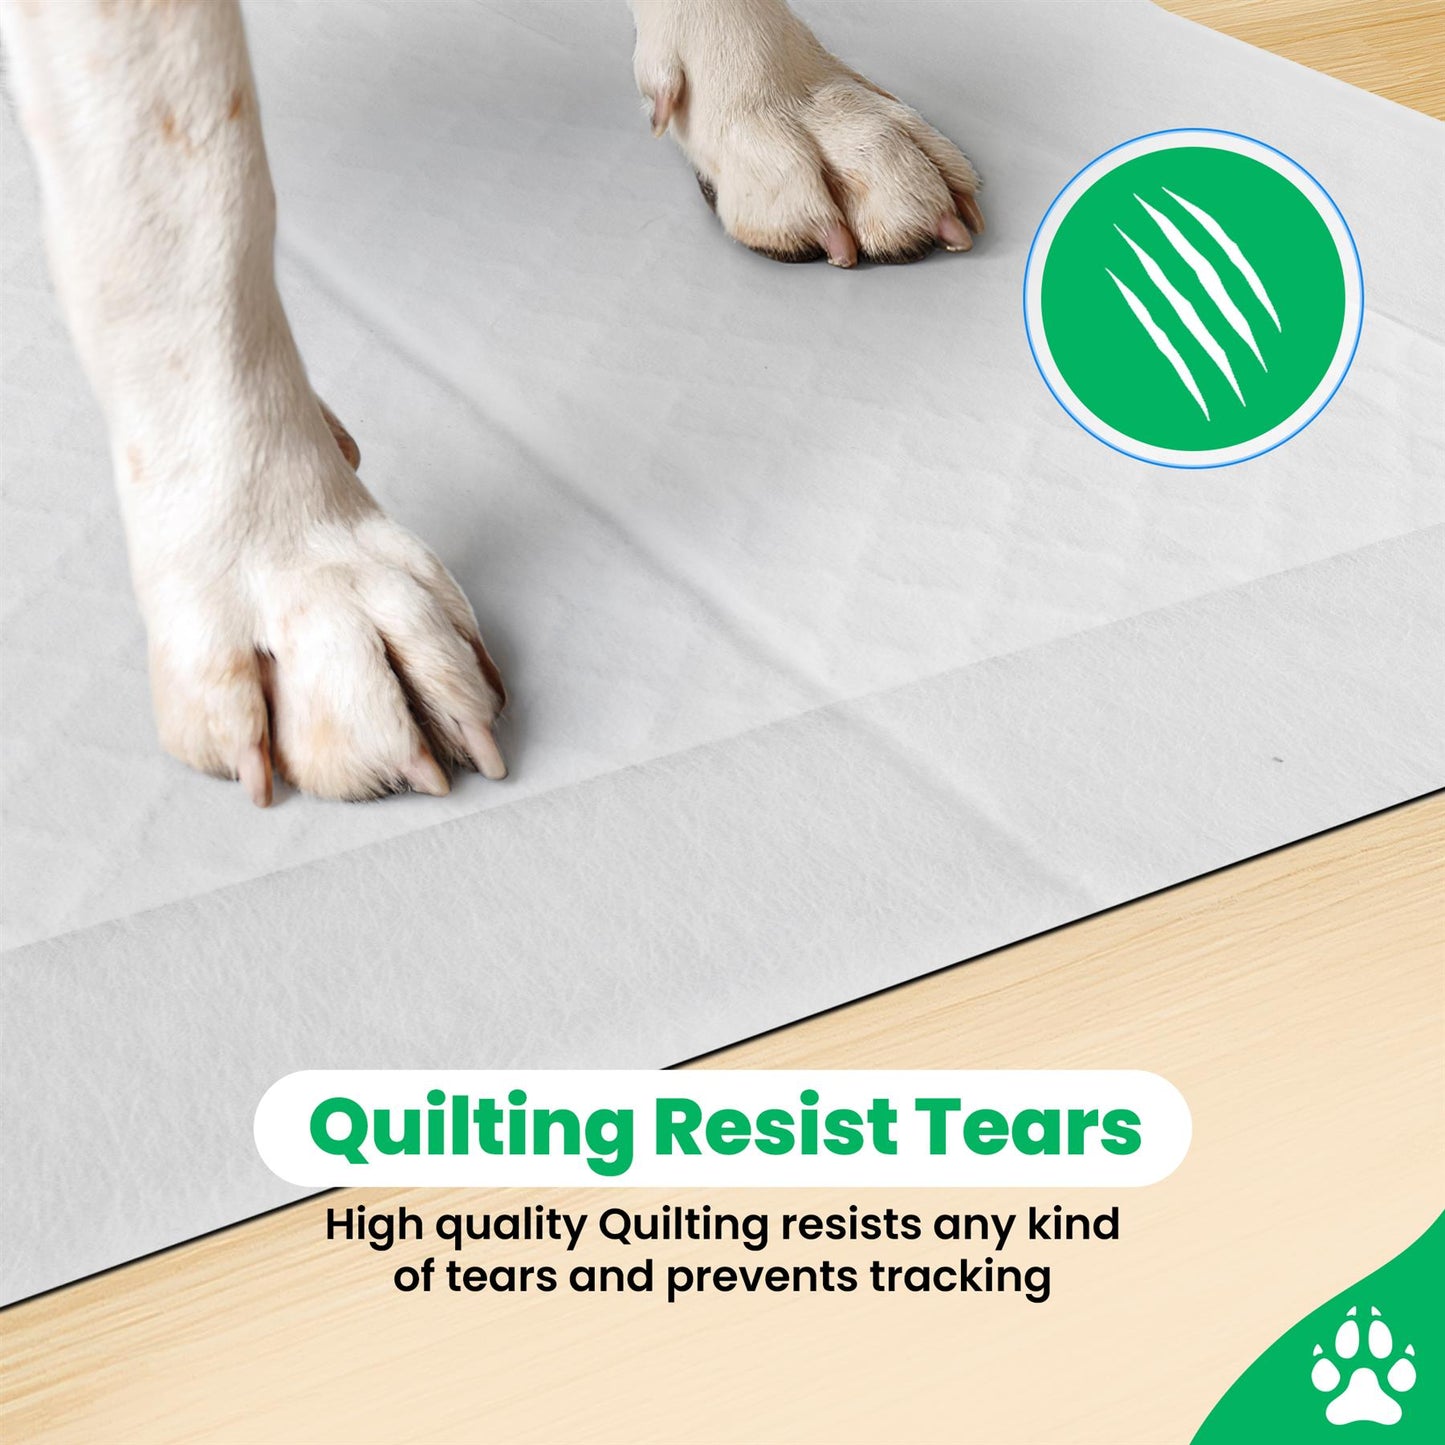 Puppy Training Pads 10 Pack